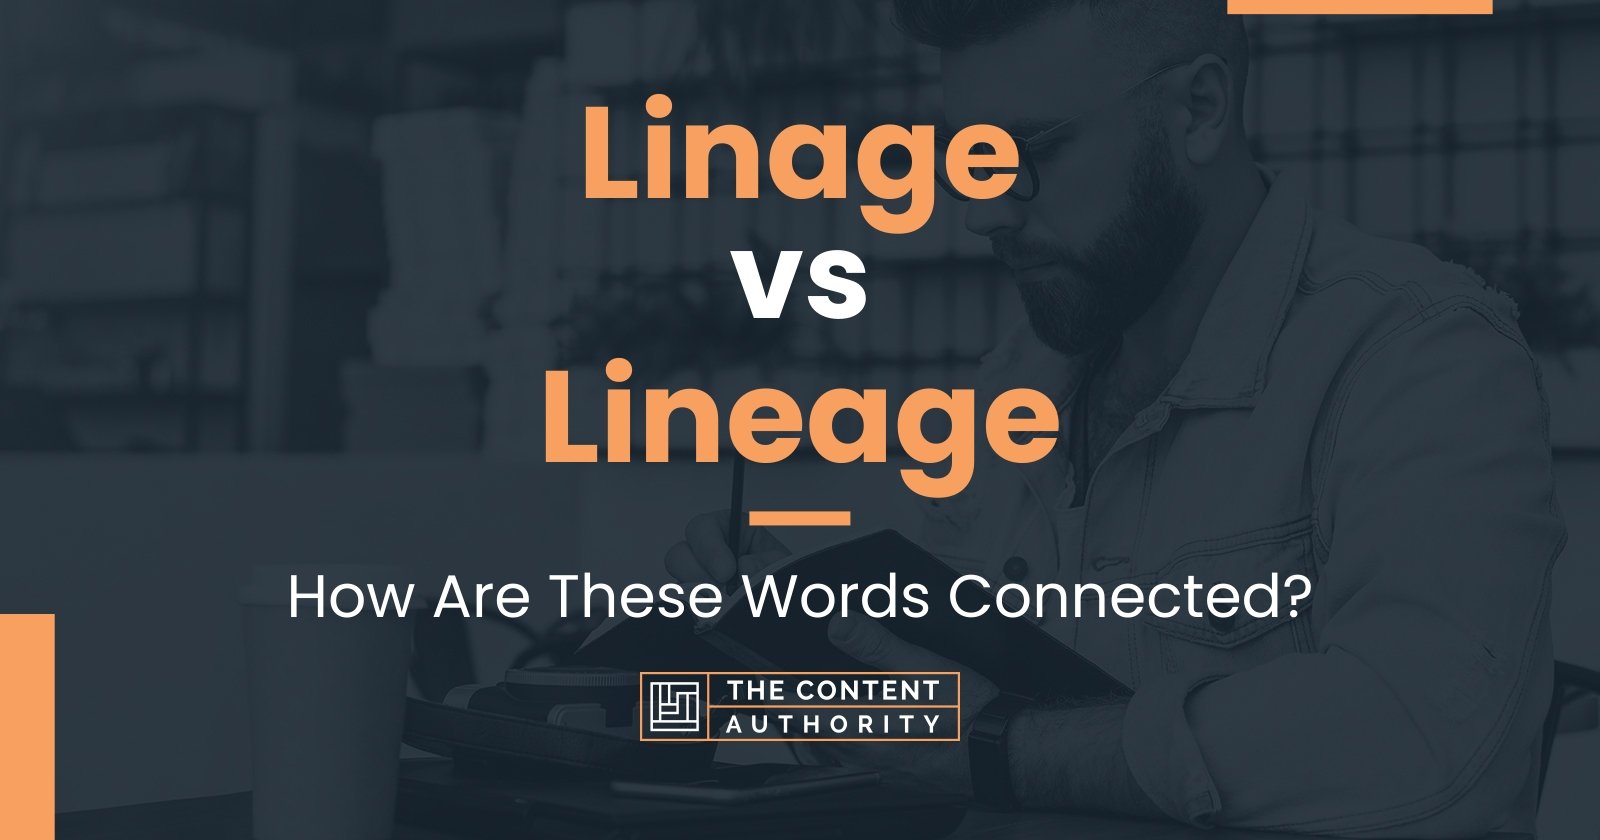 Linage vs Lineage: How Are These Words Connected?